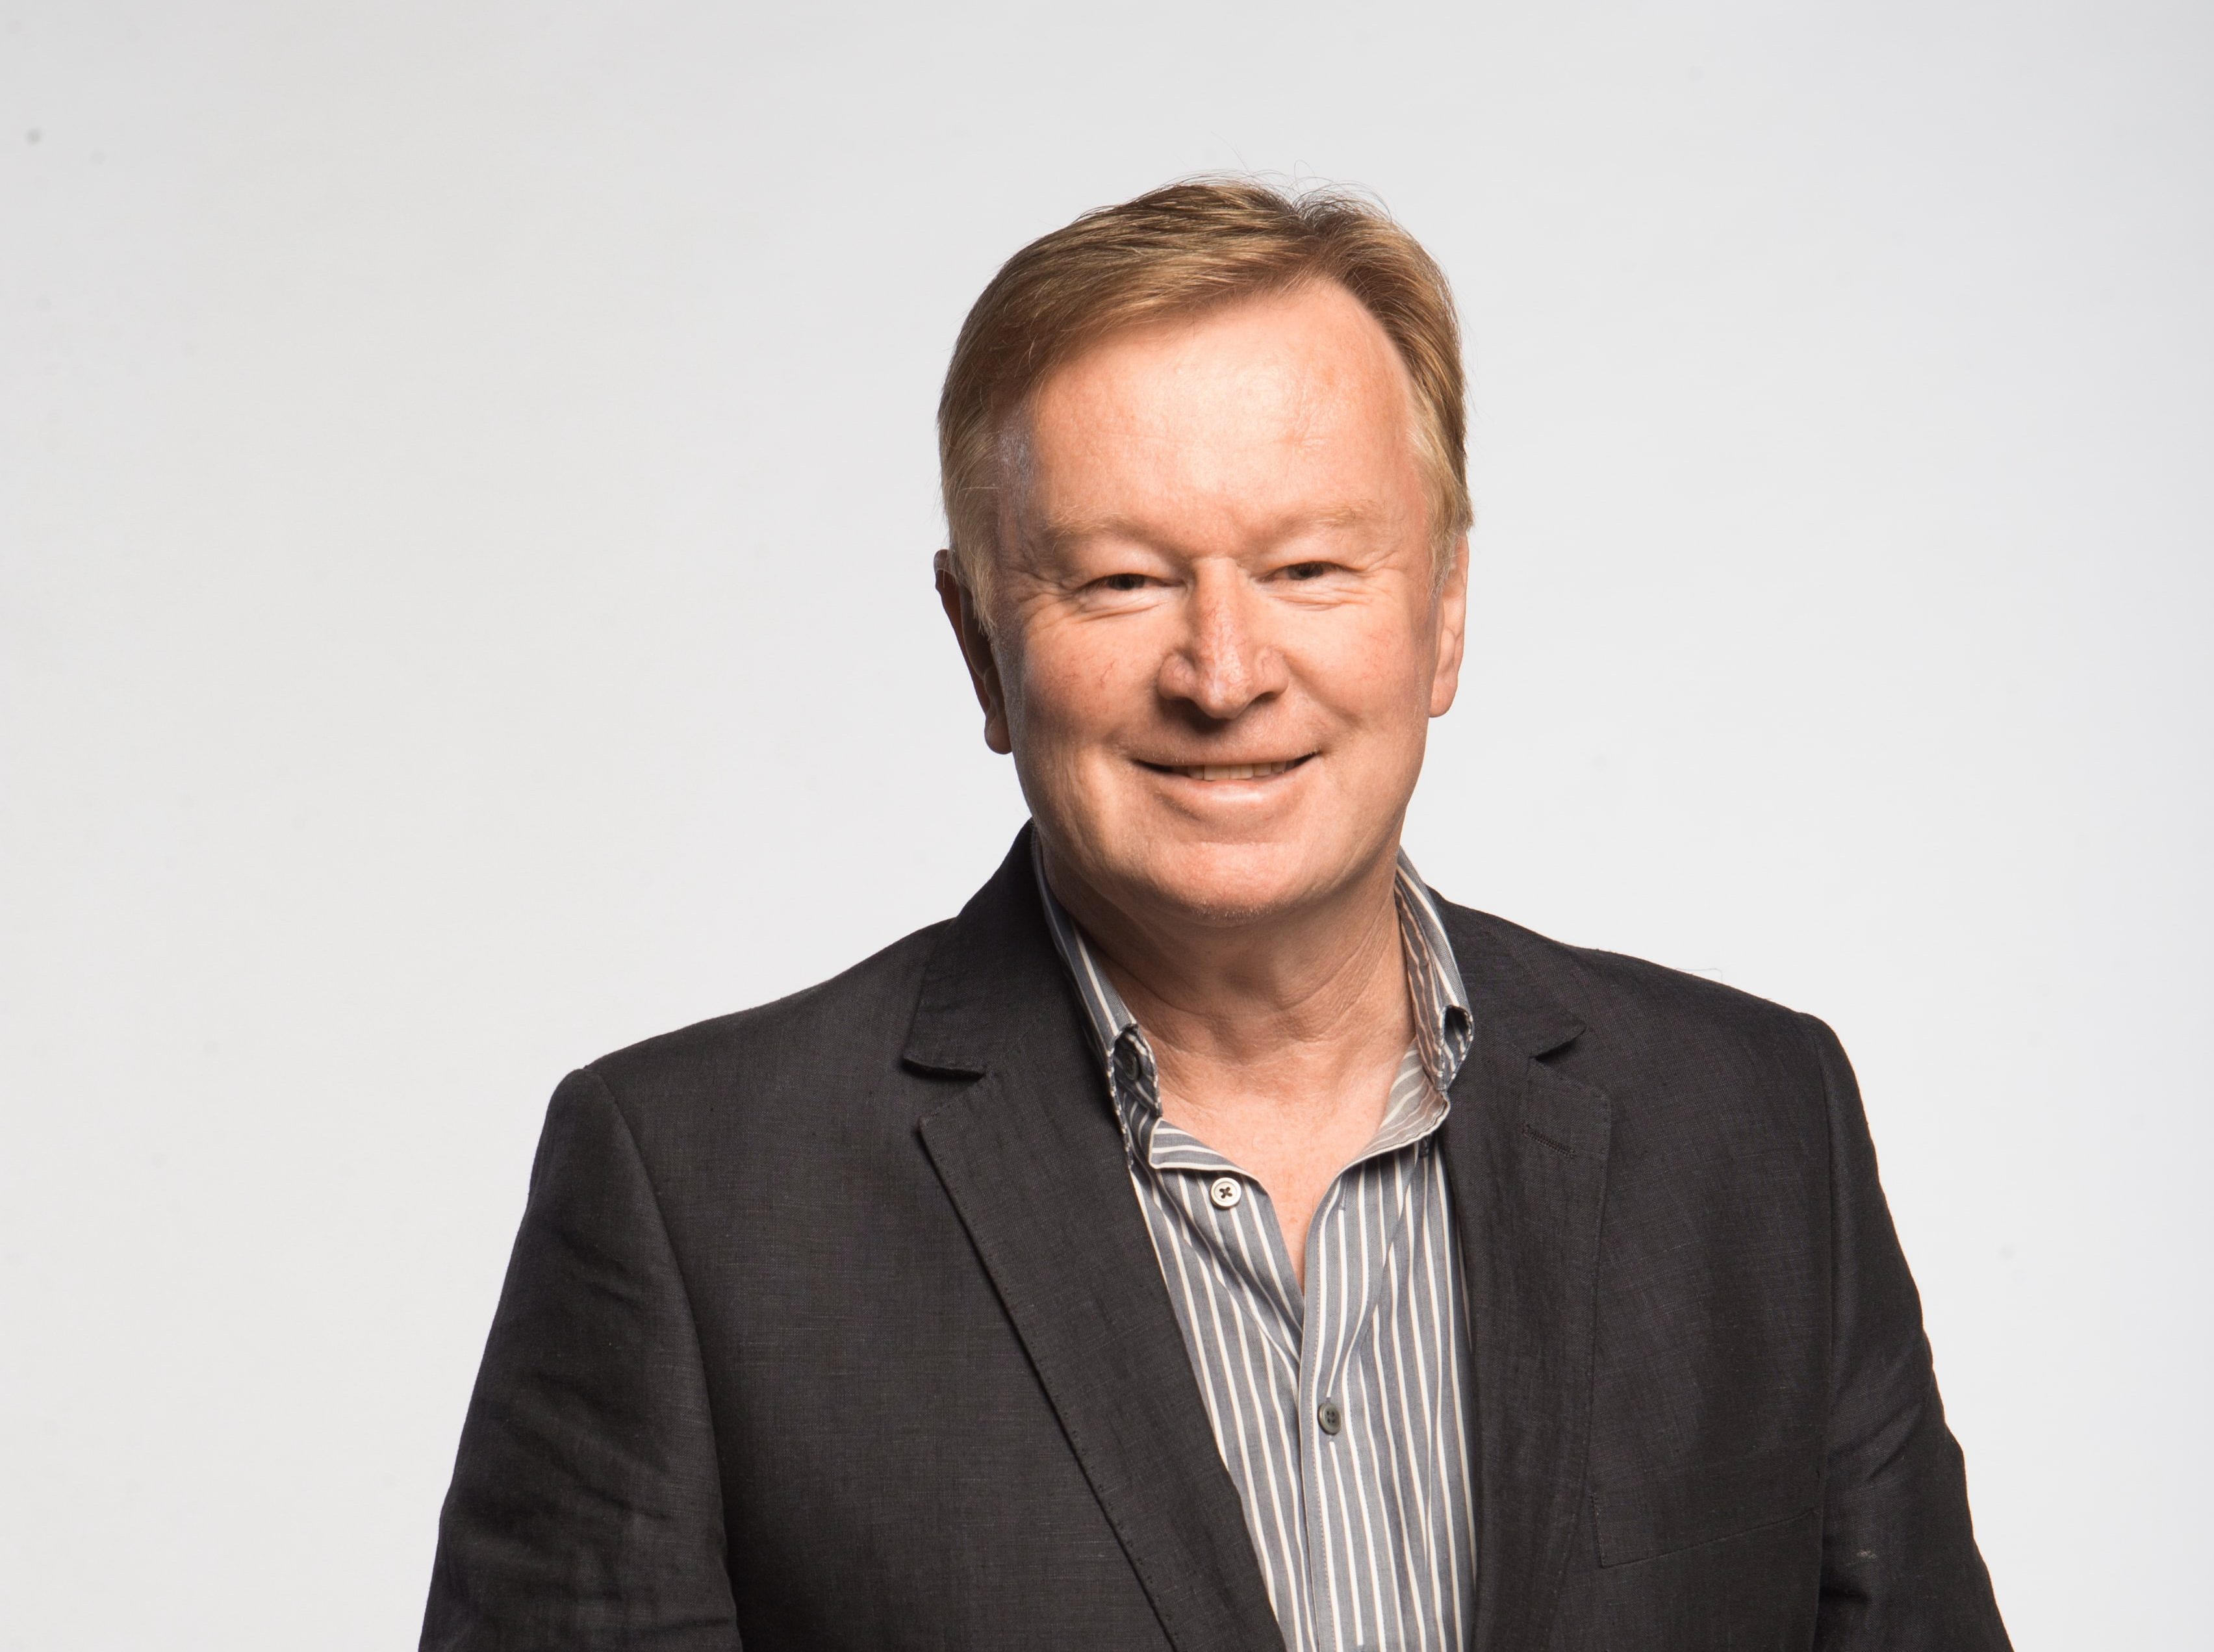 3AW's Denis Walter leaves afternoon show after 11 years to host Nights